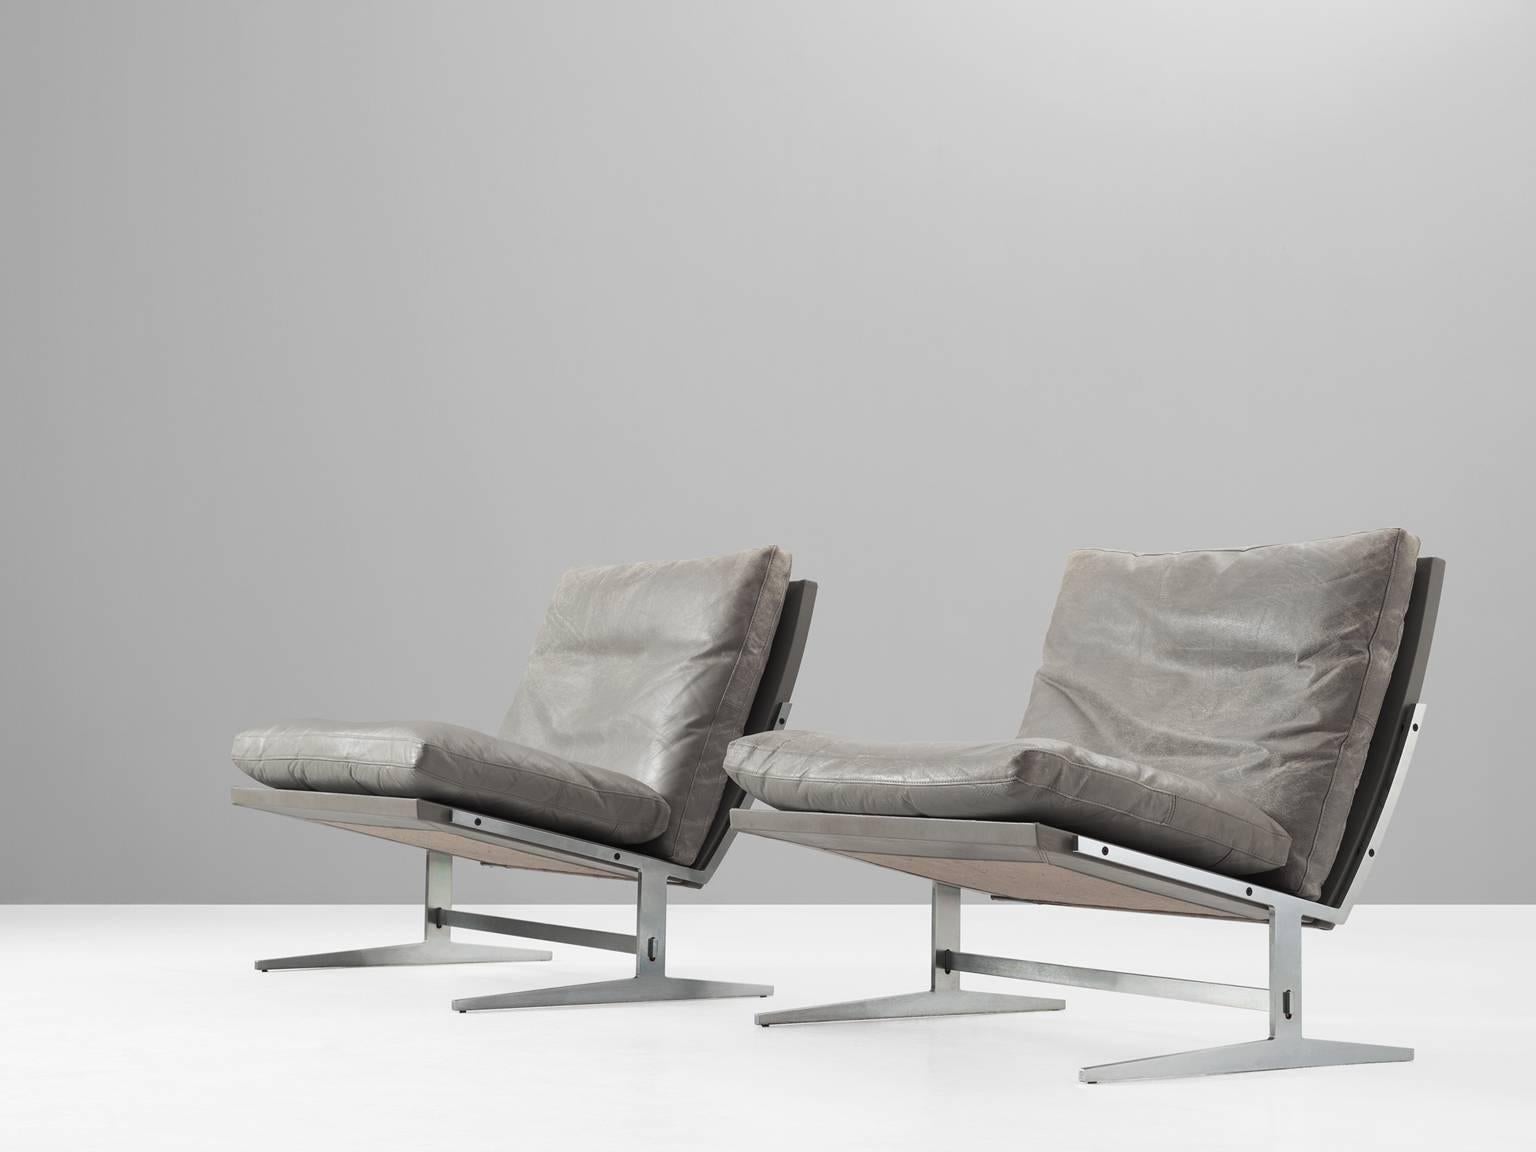 Pair of lounge chairs model BO561, in brushed steel and leather, by Preben Fabricius & Jørgen Kastholm, Denmark, 1962. 

Set of two modern slipper chairs in steel and leather. These chairs hold an L-shaped seating. This shape is repeated in